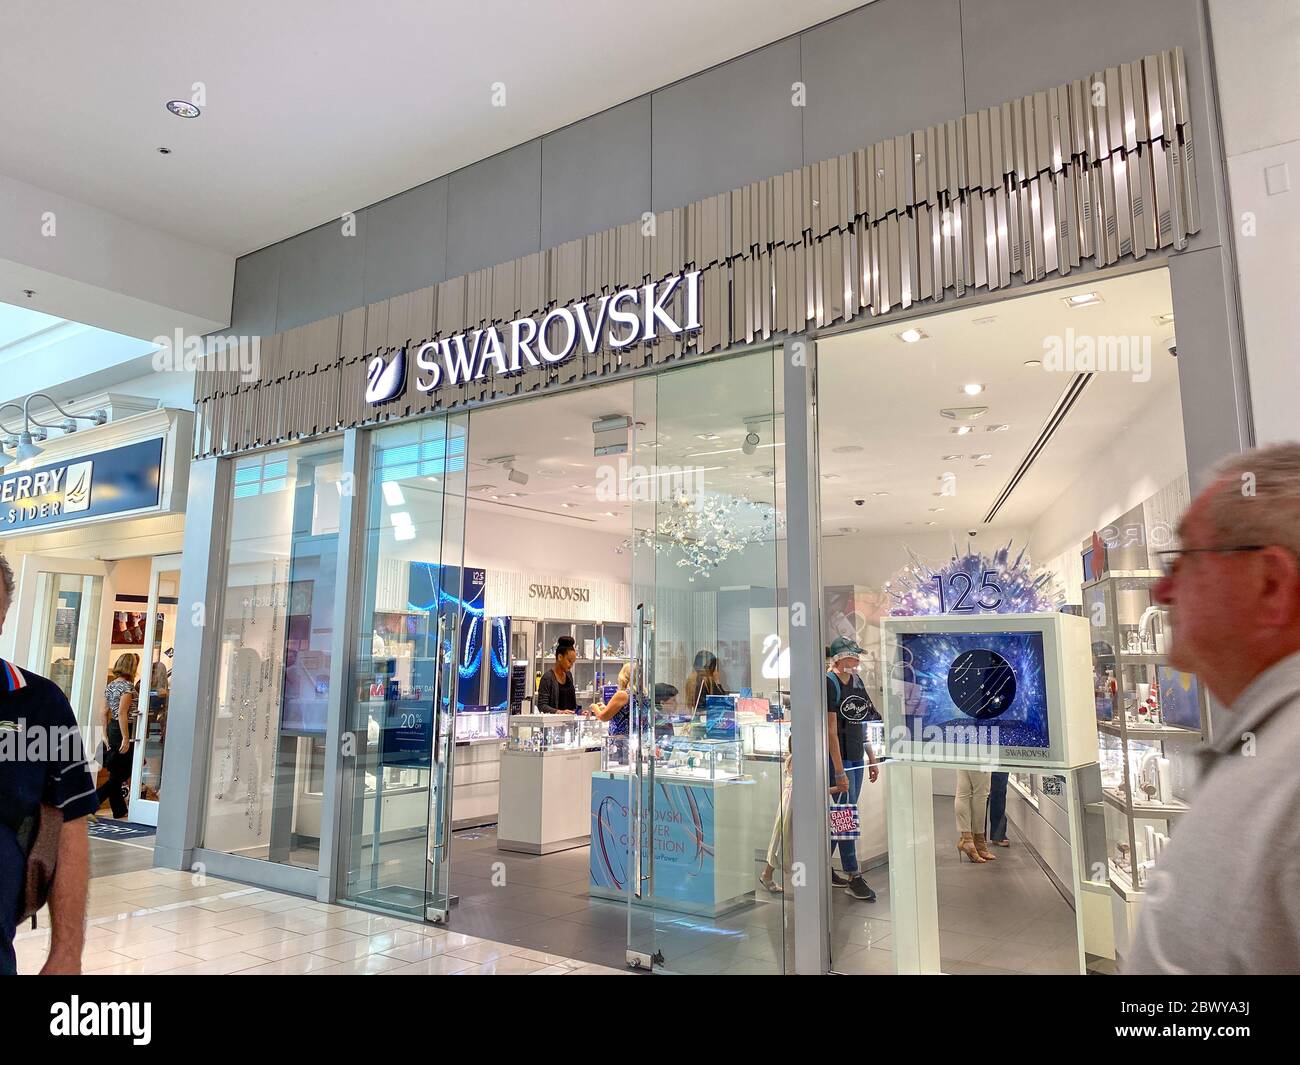 Page 3 - Swarovski Shop High Resolution Stock Photography and Images - Alamy